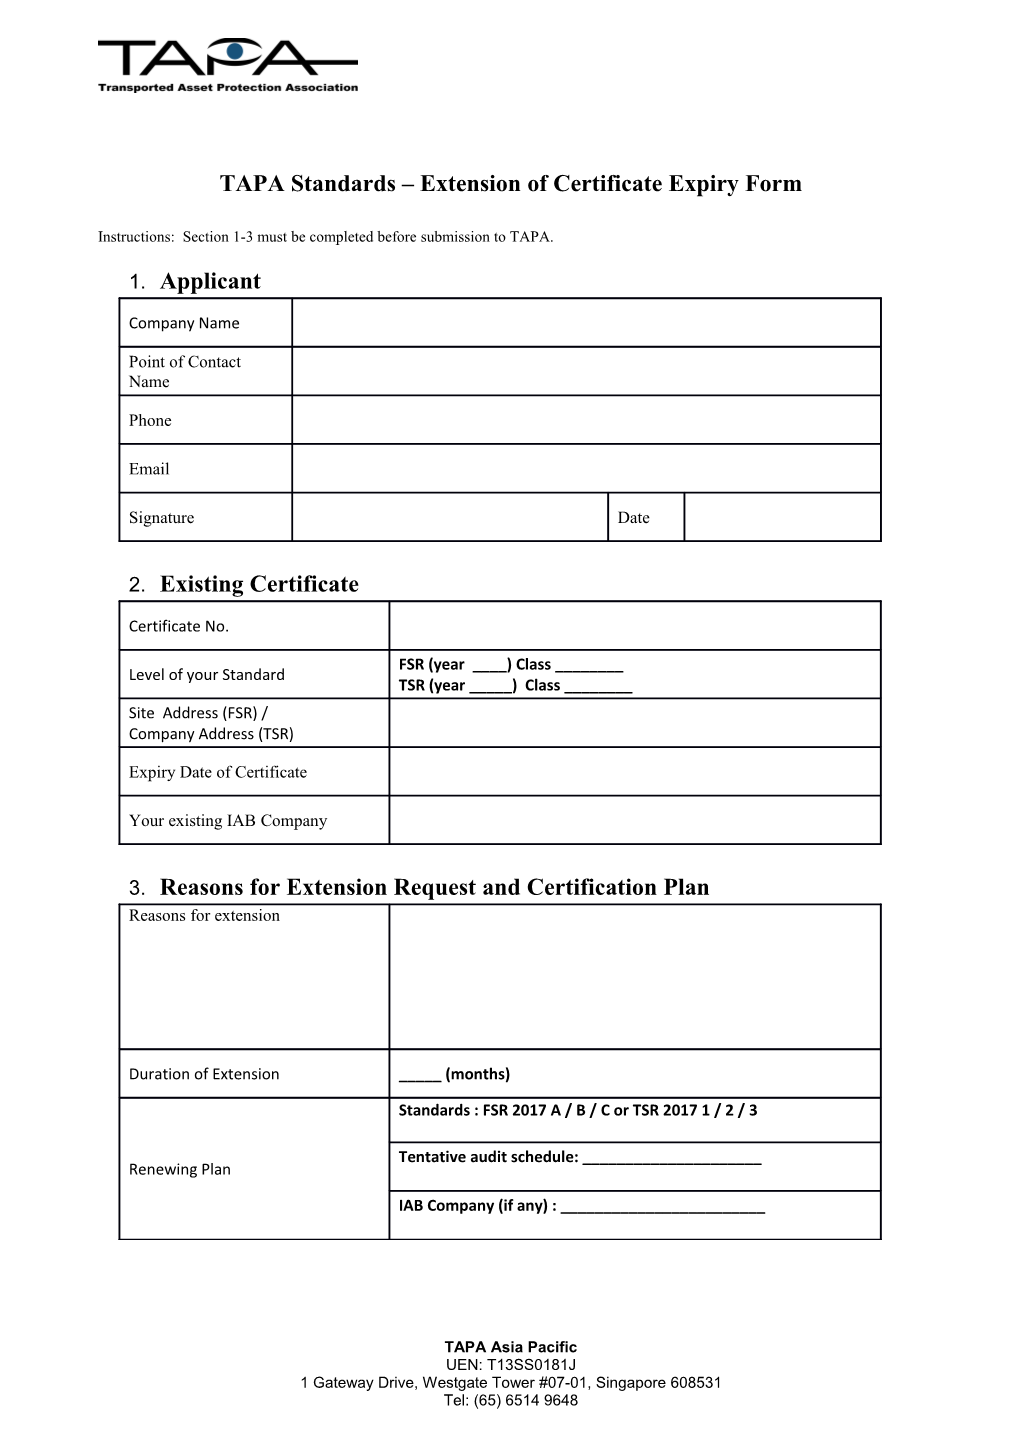 TAPA Standards Extension of Certificate Expiry Form